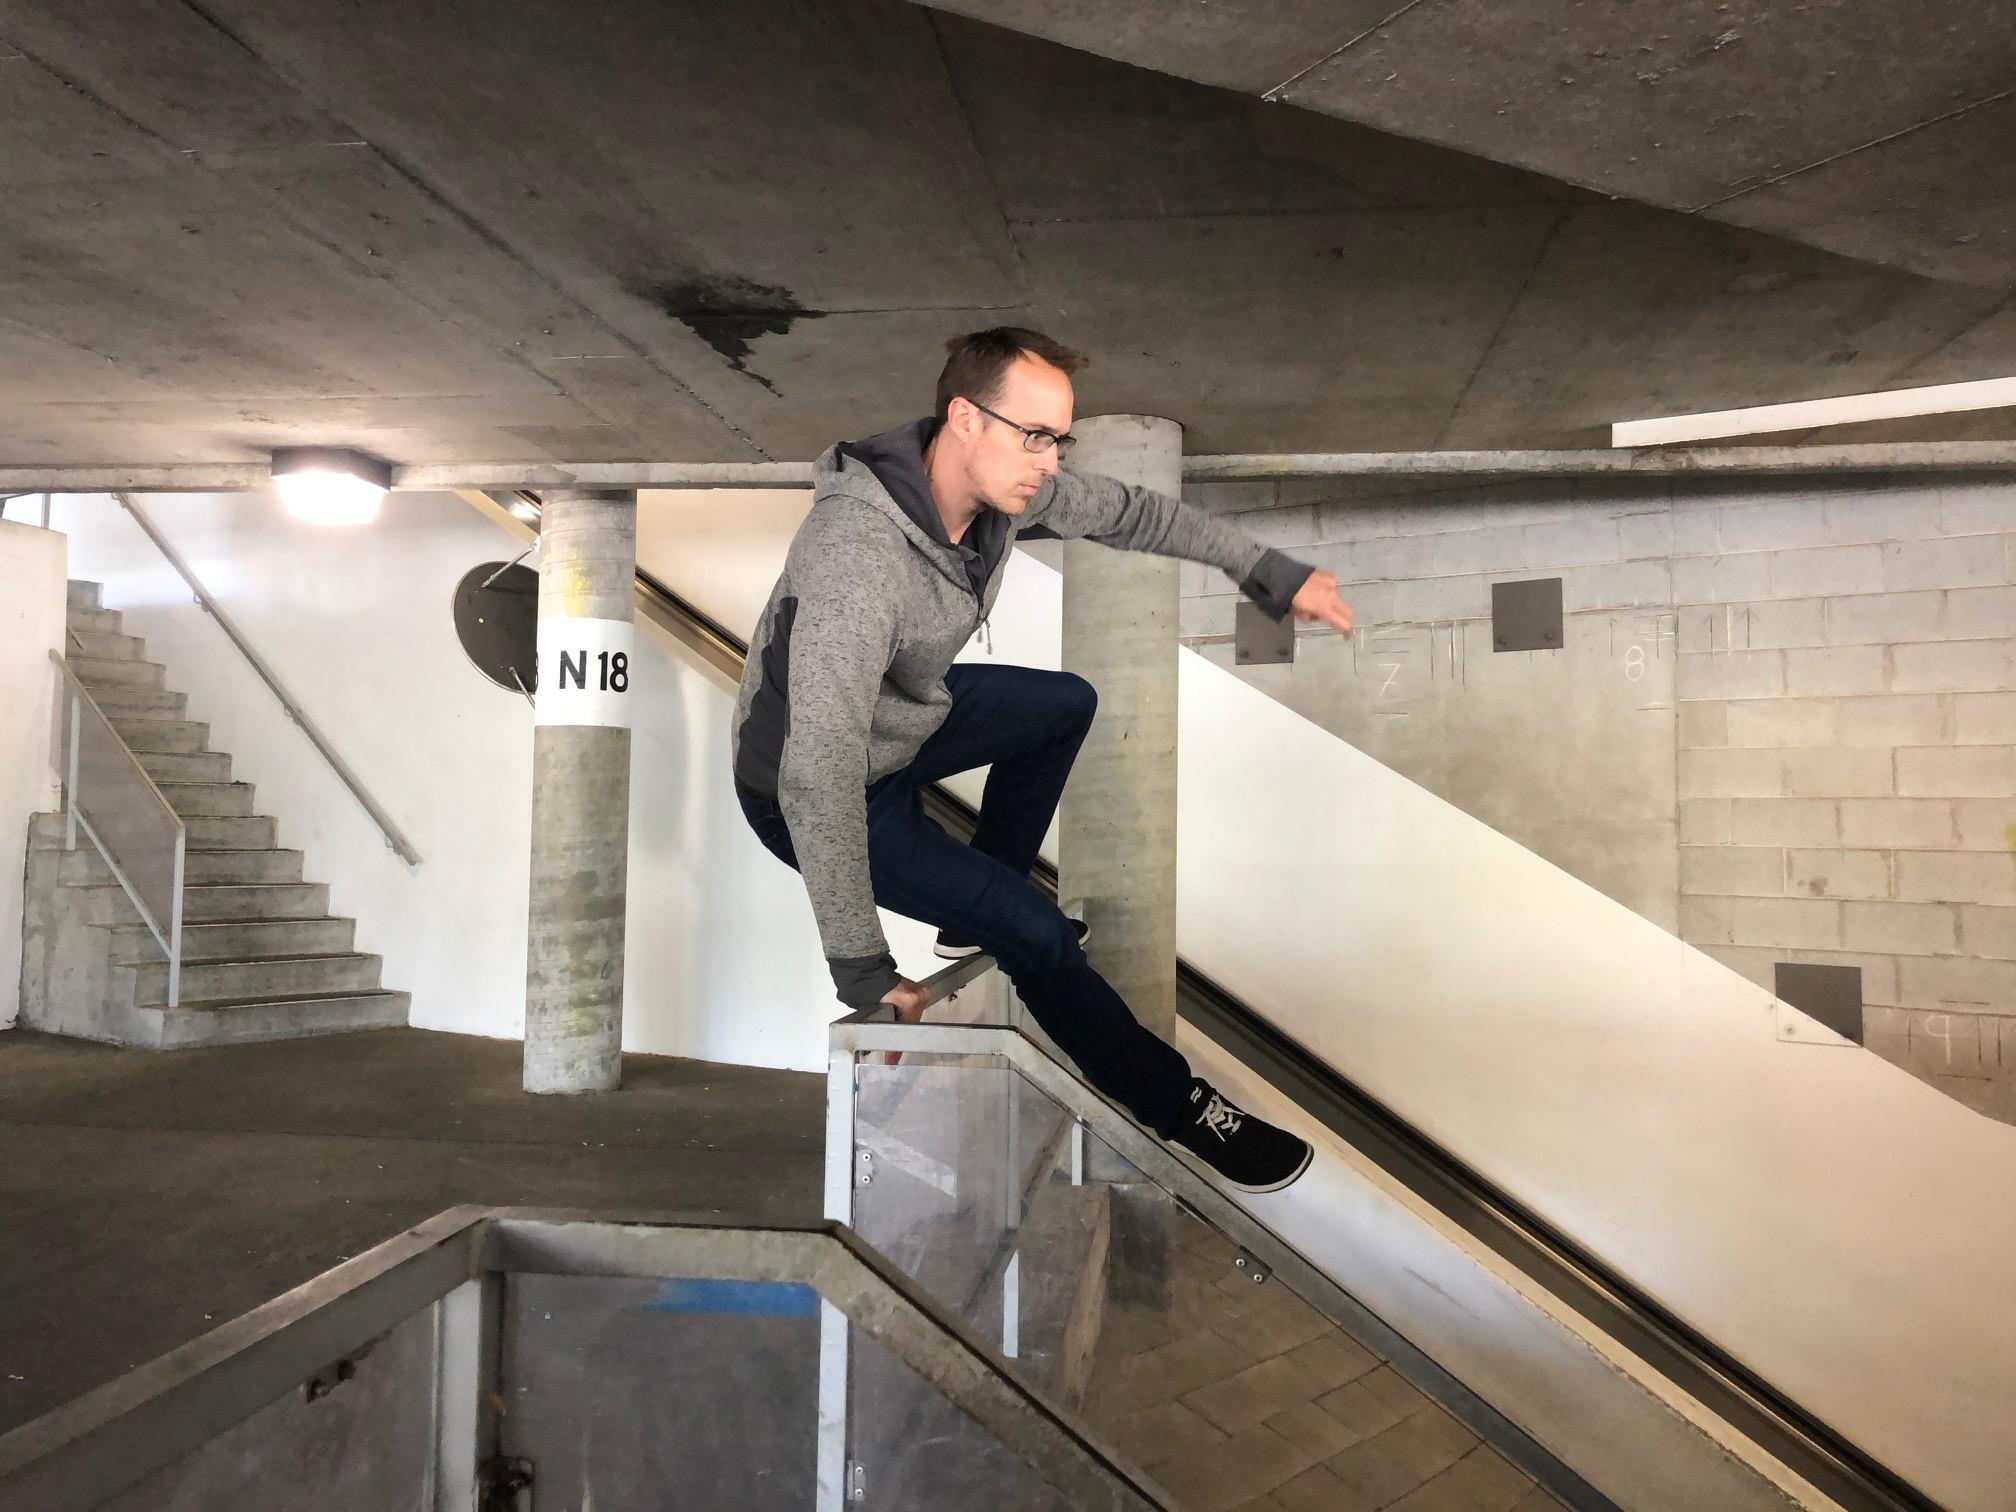 Sunday Parkour with Ian Schwartz: Drop-In Community Class